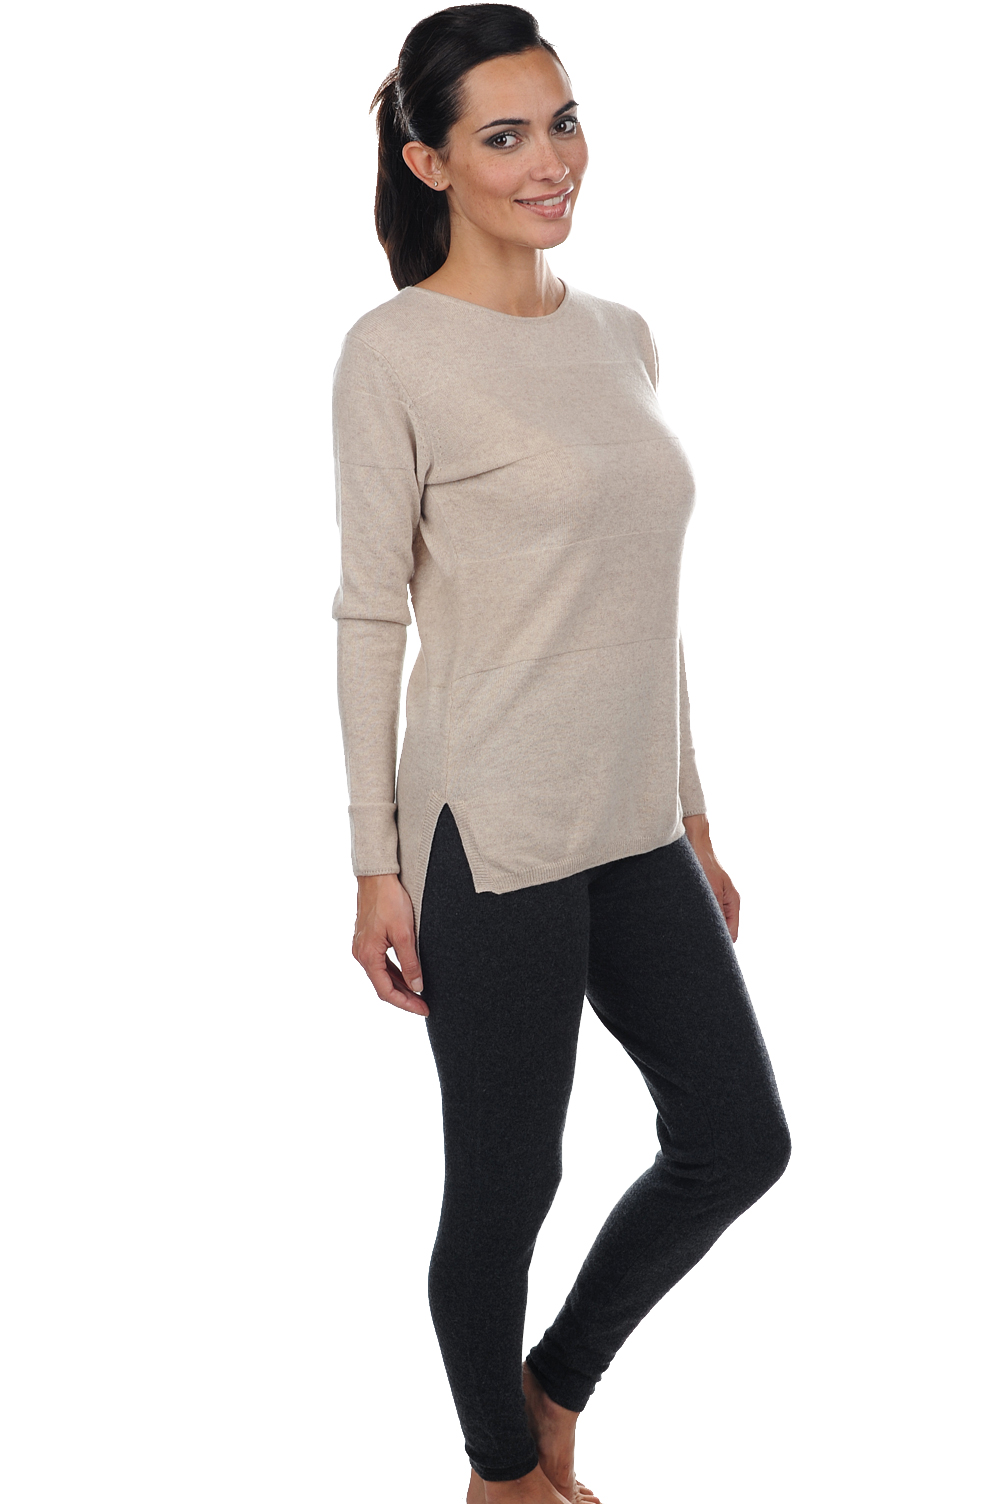 Cashmere ladies cocooning xelina charcoal marl s